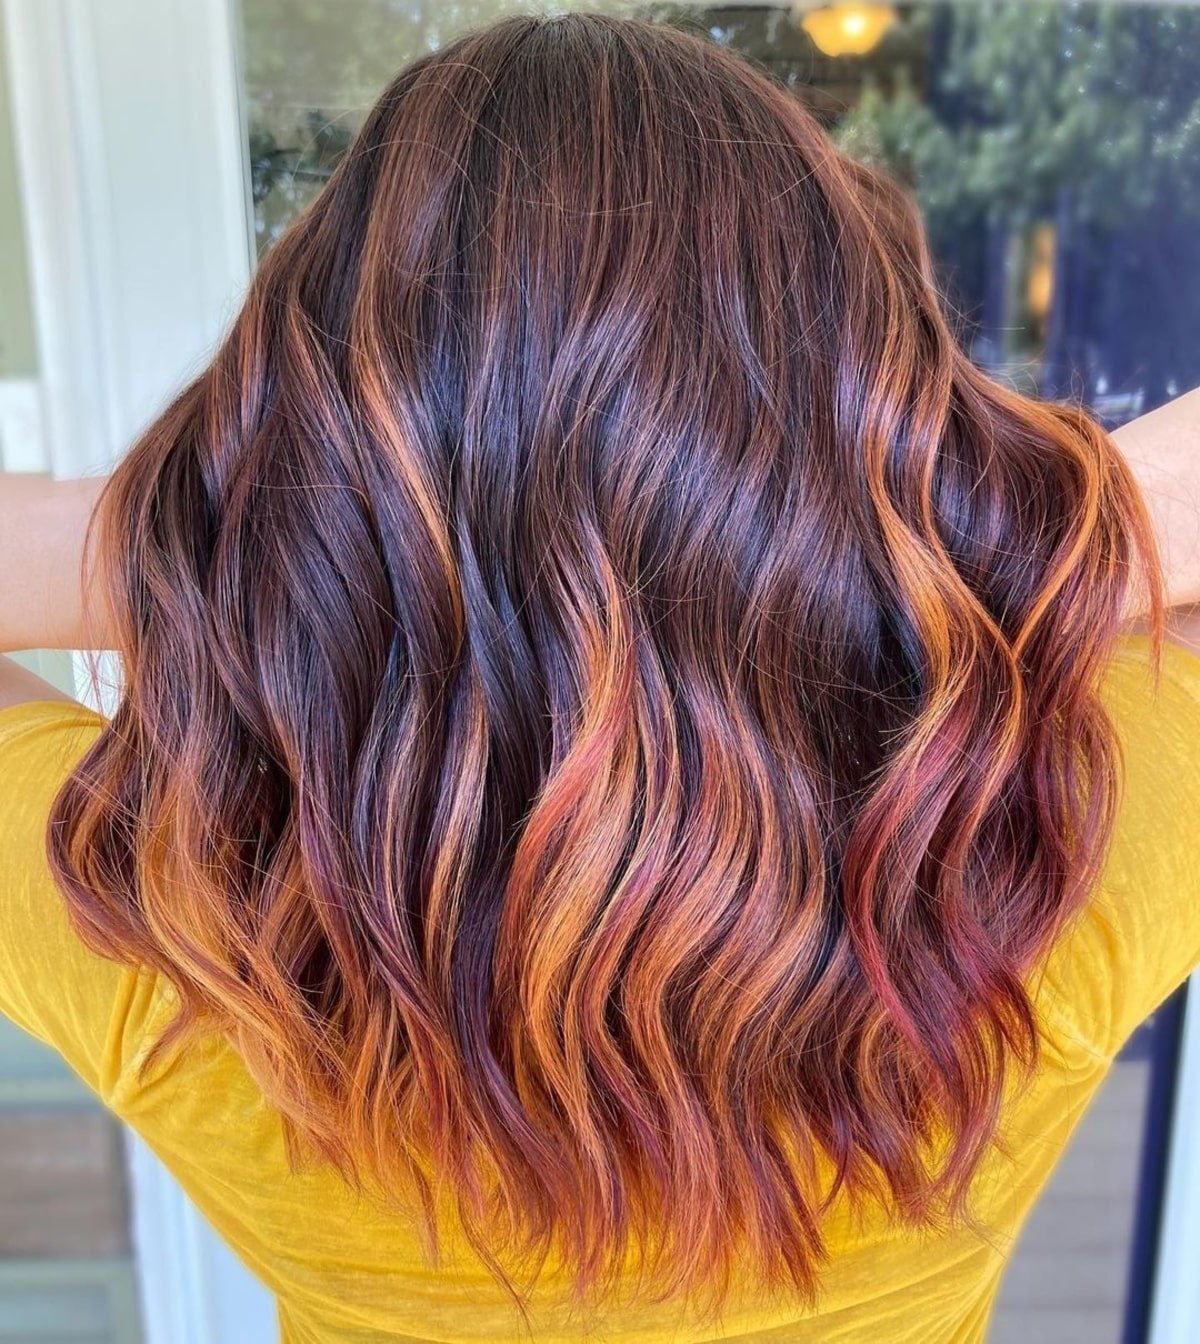 Dark ginger red hair with caramel highlights